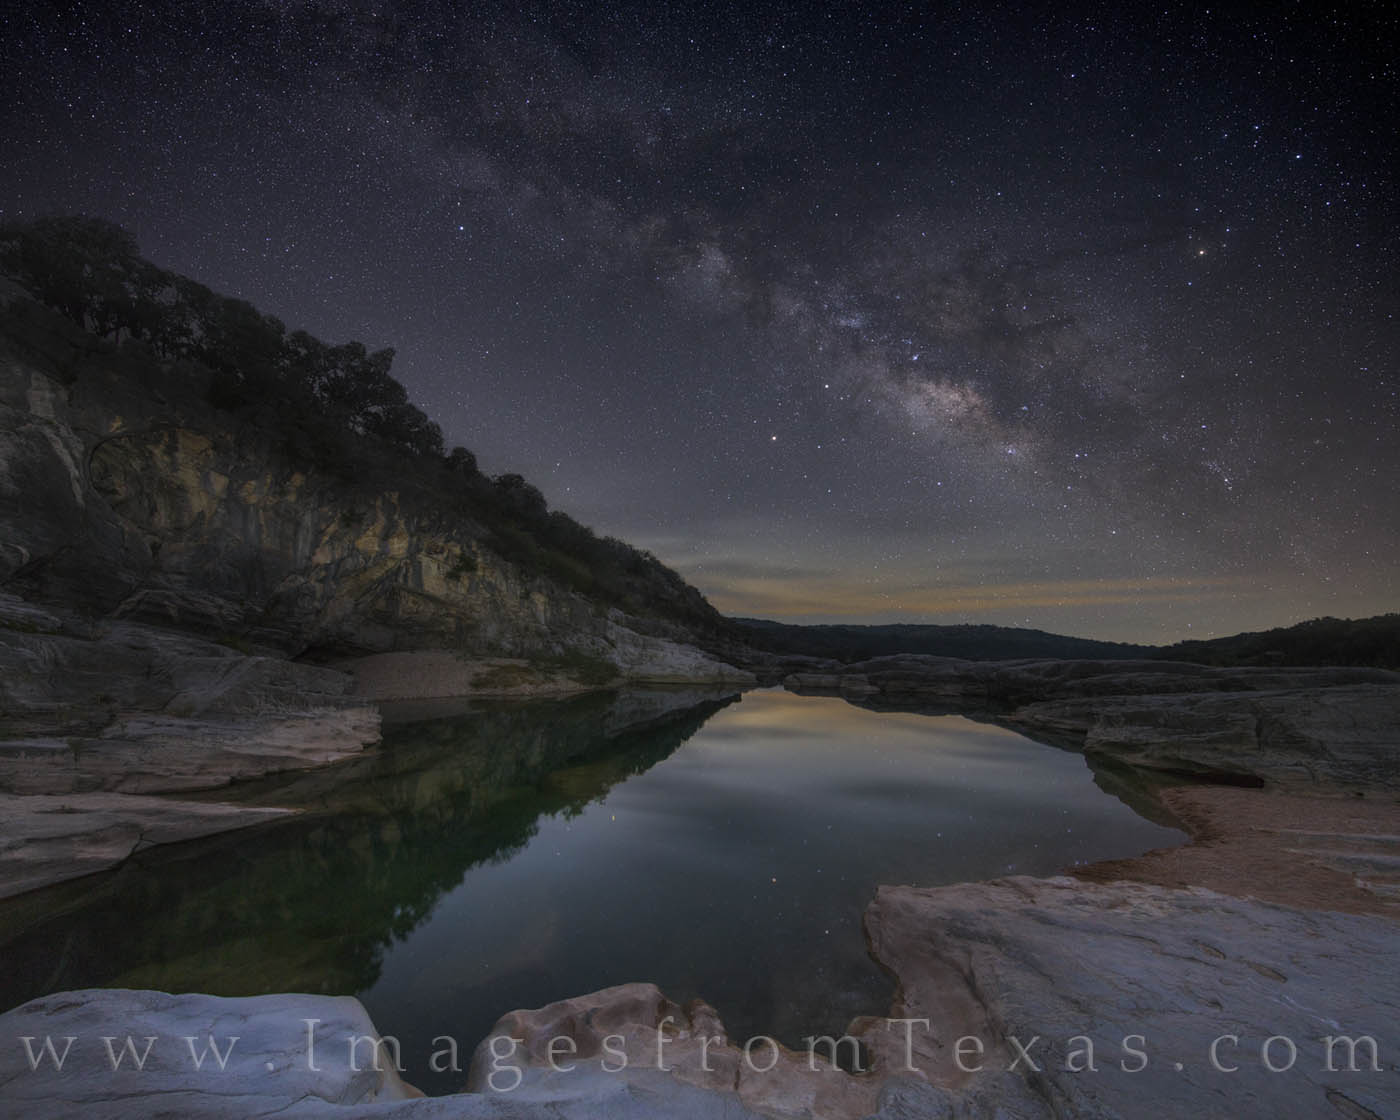 On a perfectly still night in the Texas Hill Country, the Milky Way rolls across the night sky in unrivaled splendor. In this...